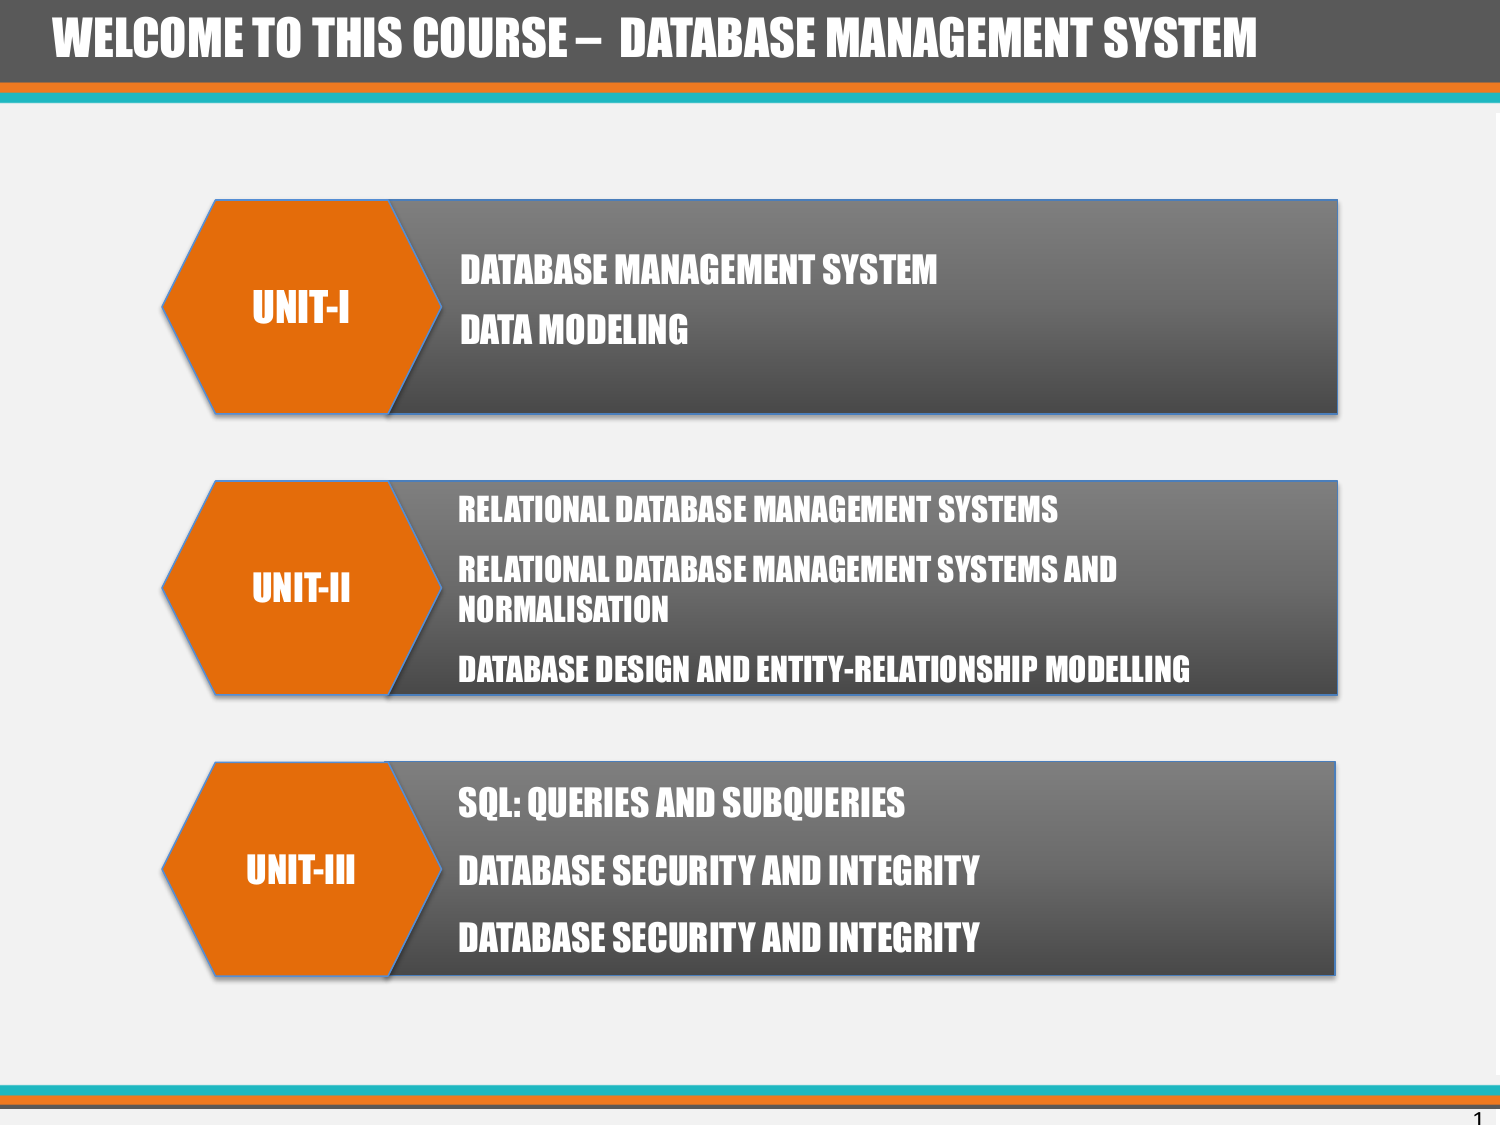 what is considered a database management system